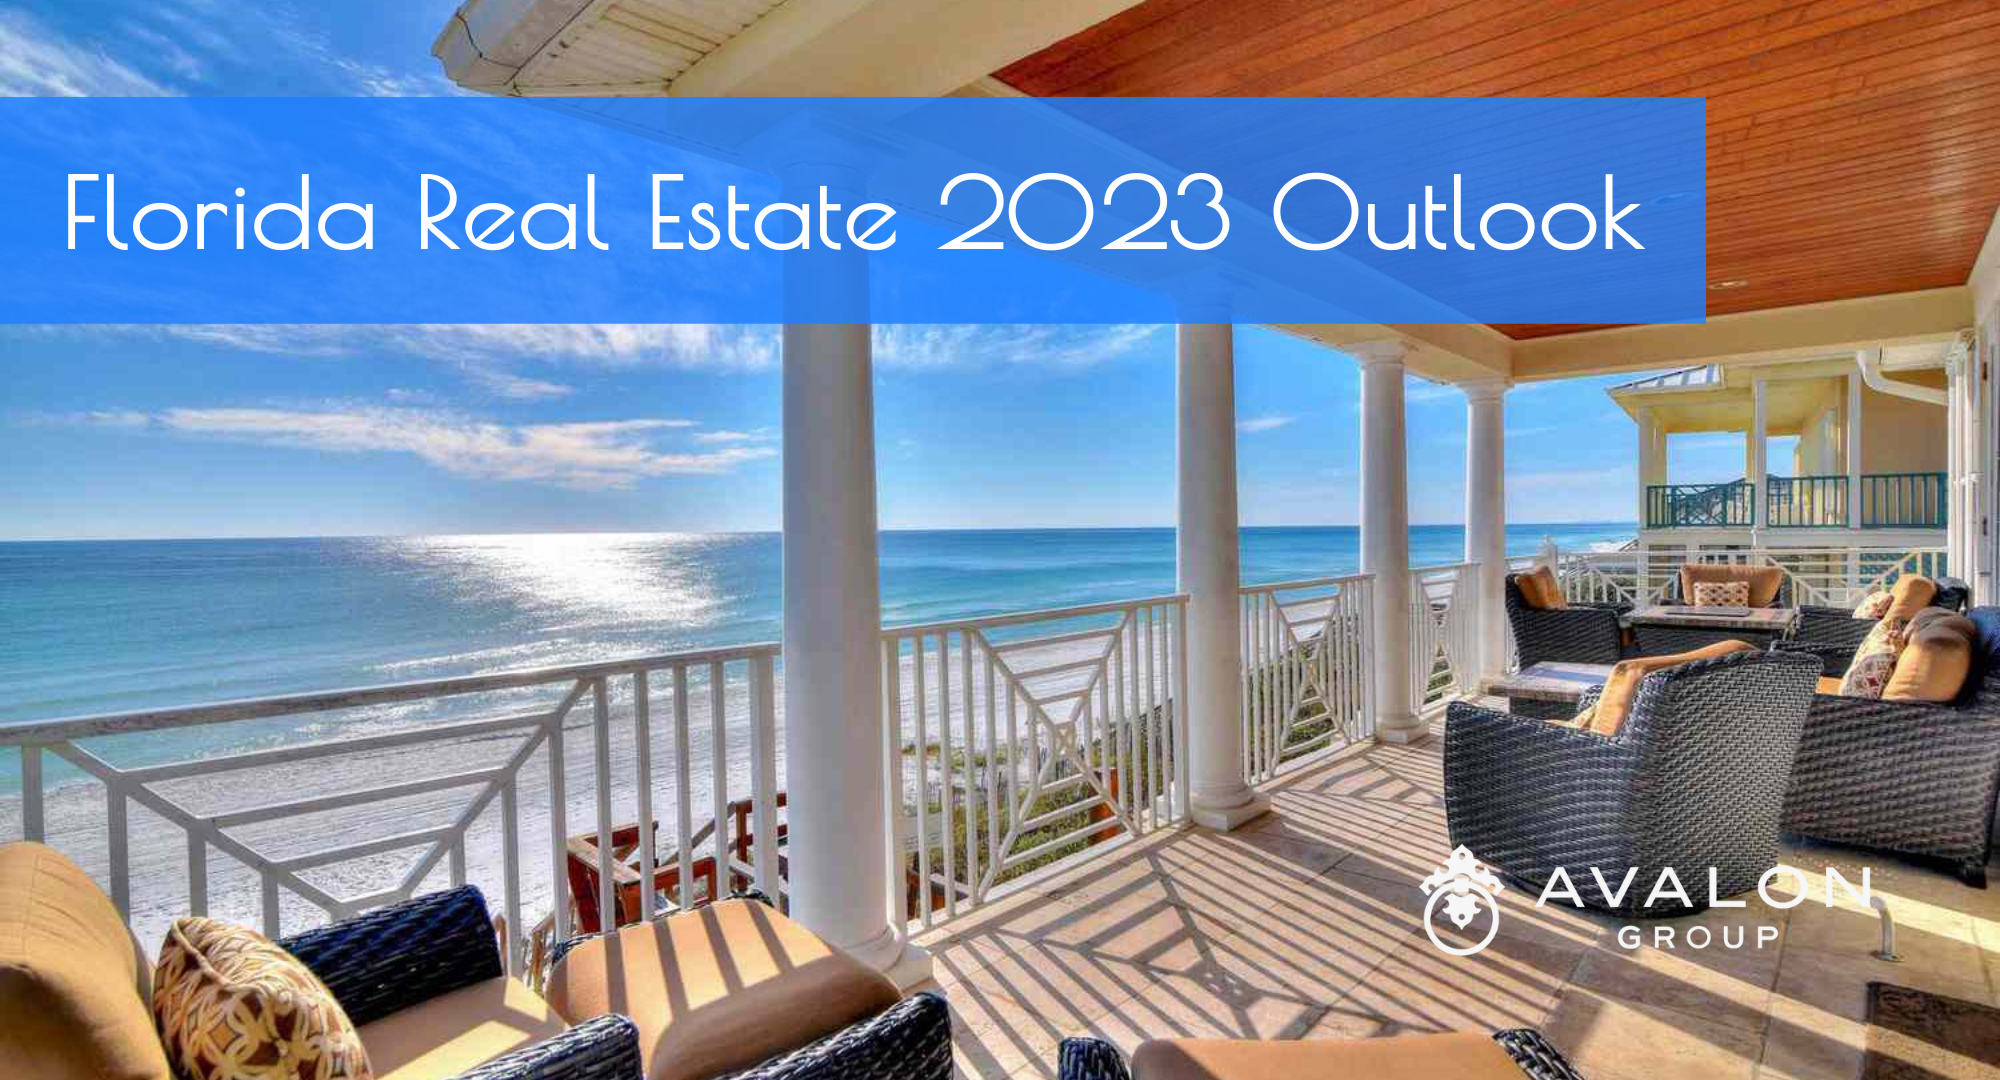 Florida Real Estate 2023 Outlook Avalon Group Cover Pic that shows a porch on the beach with a water view.